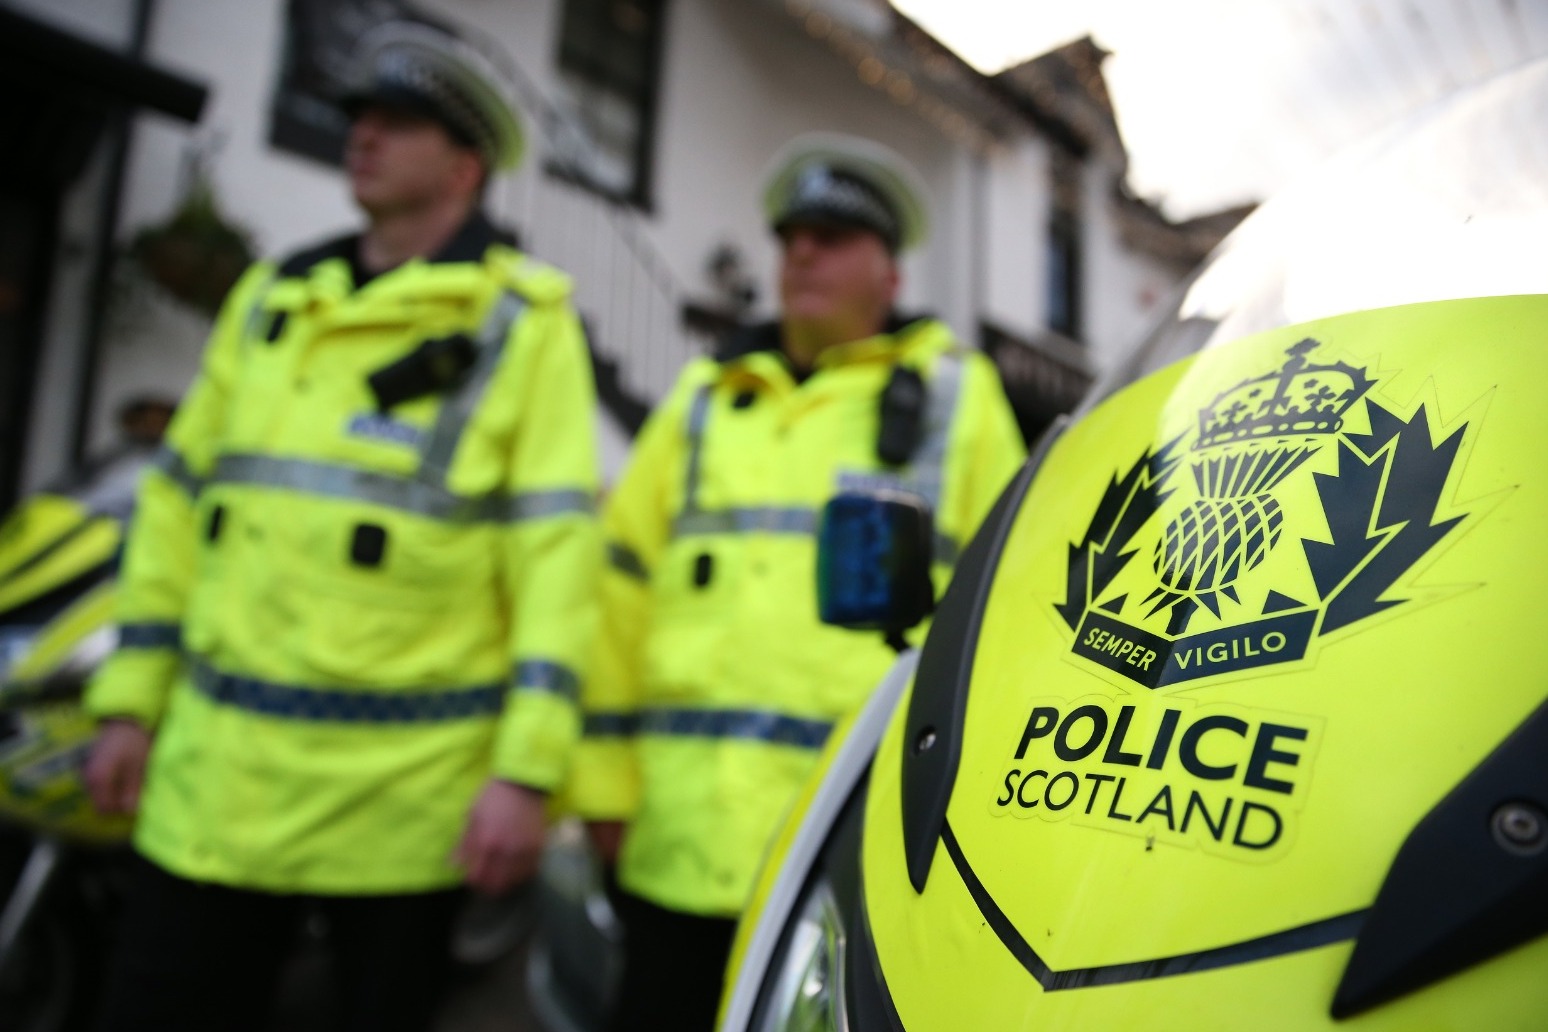 More than £4.5m worth of drugs seized in Scotland over three months 